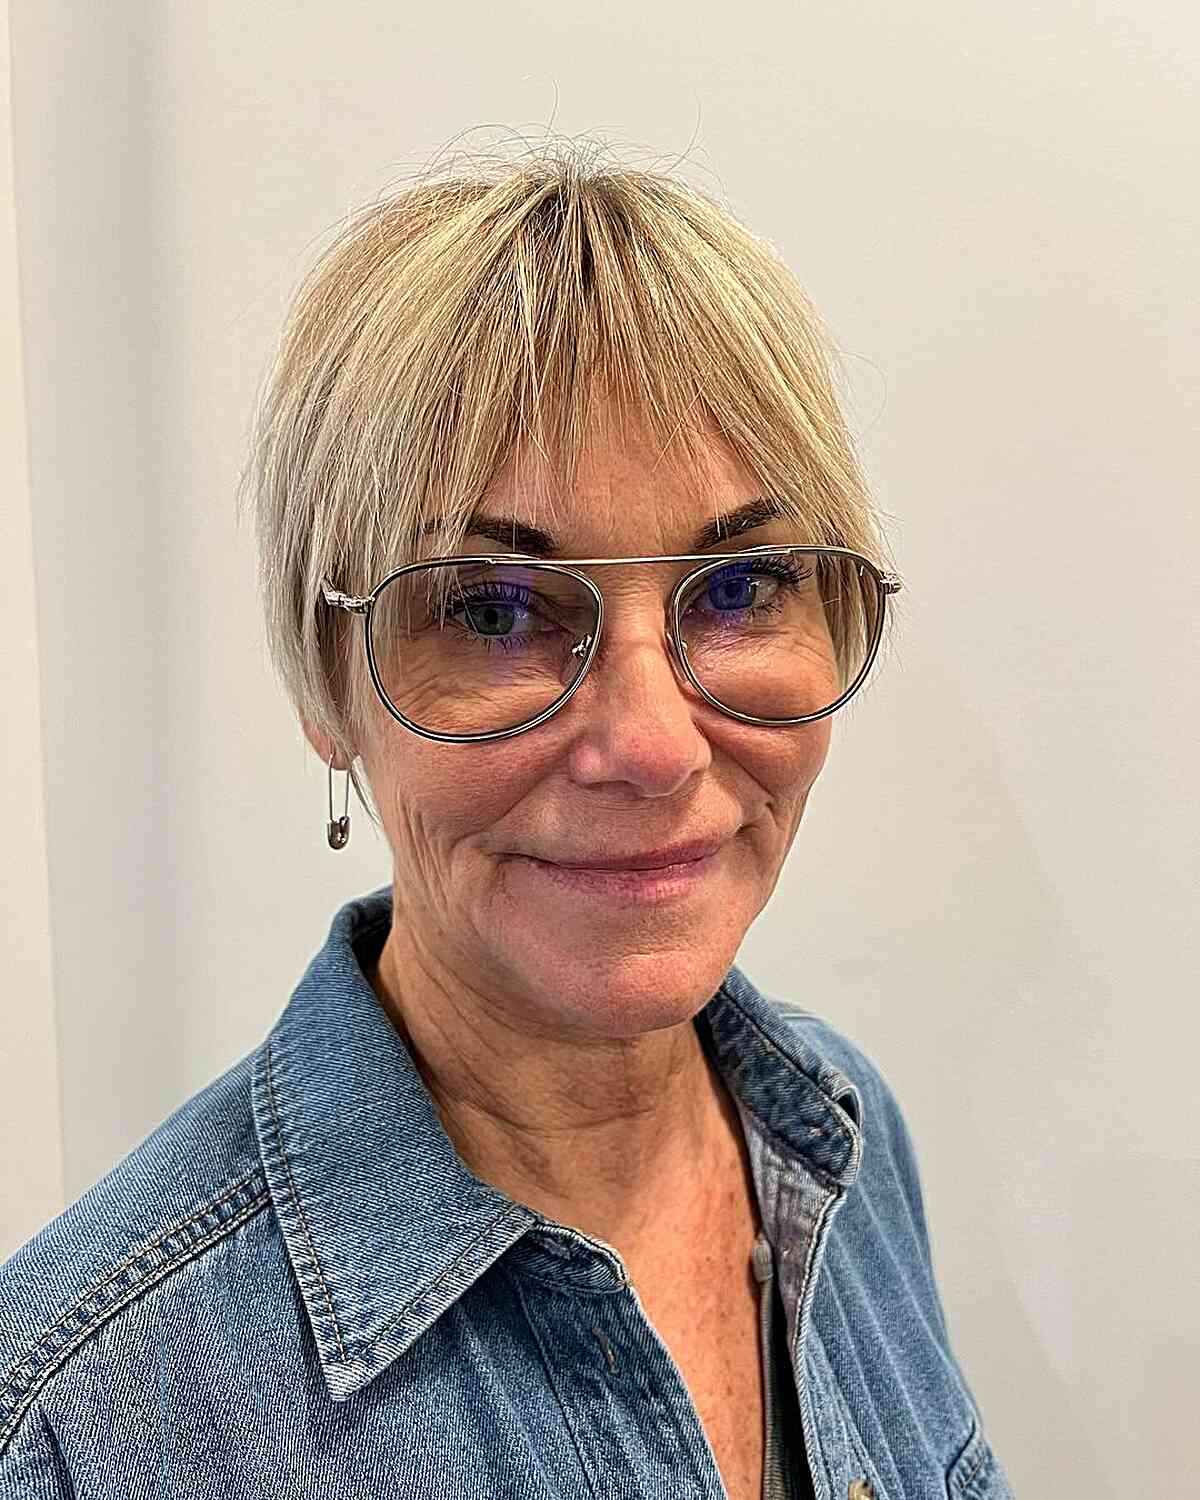 Blonde Pixie Haircut with French Bangs for Women in Their 50s with Glasses